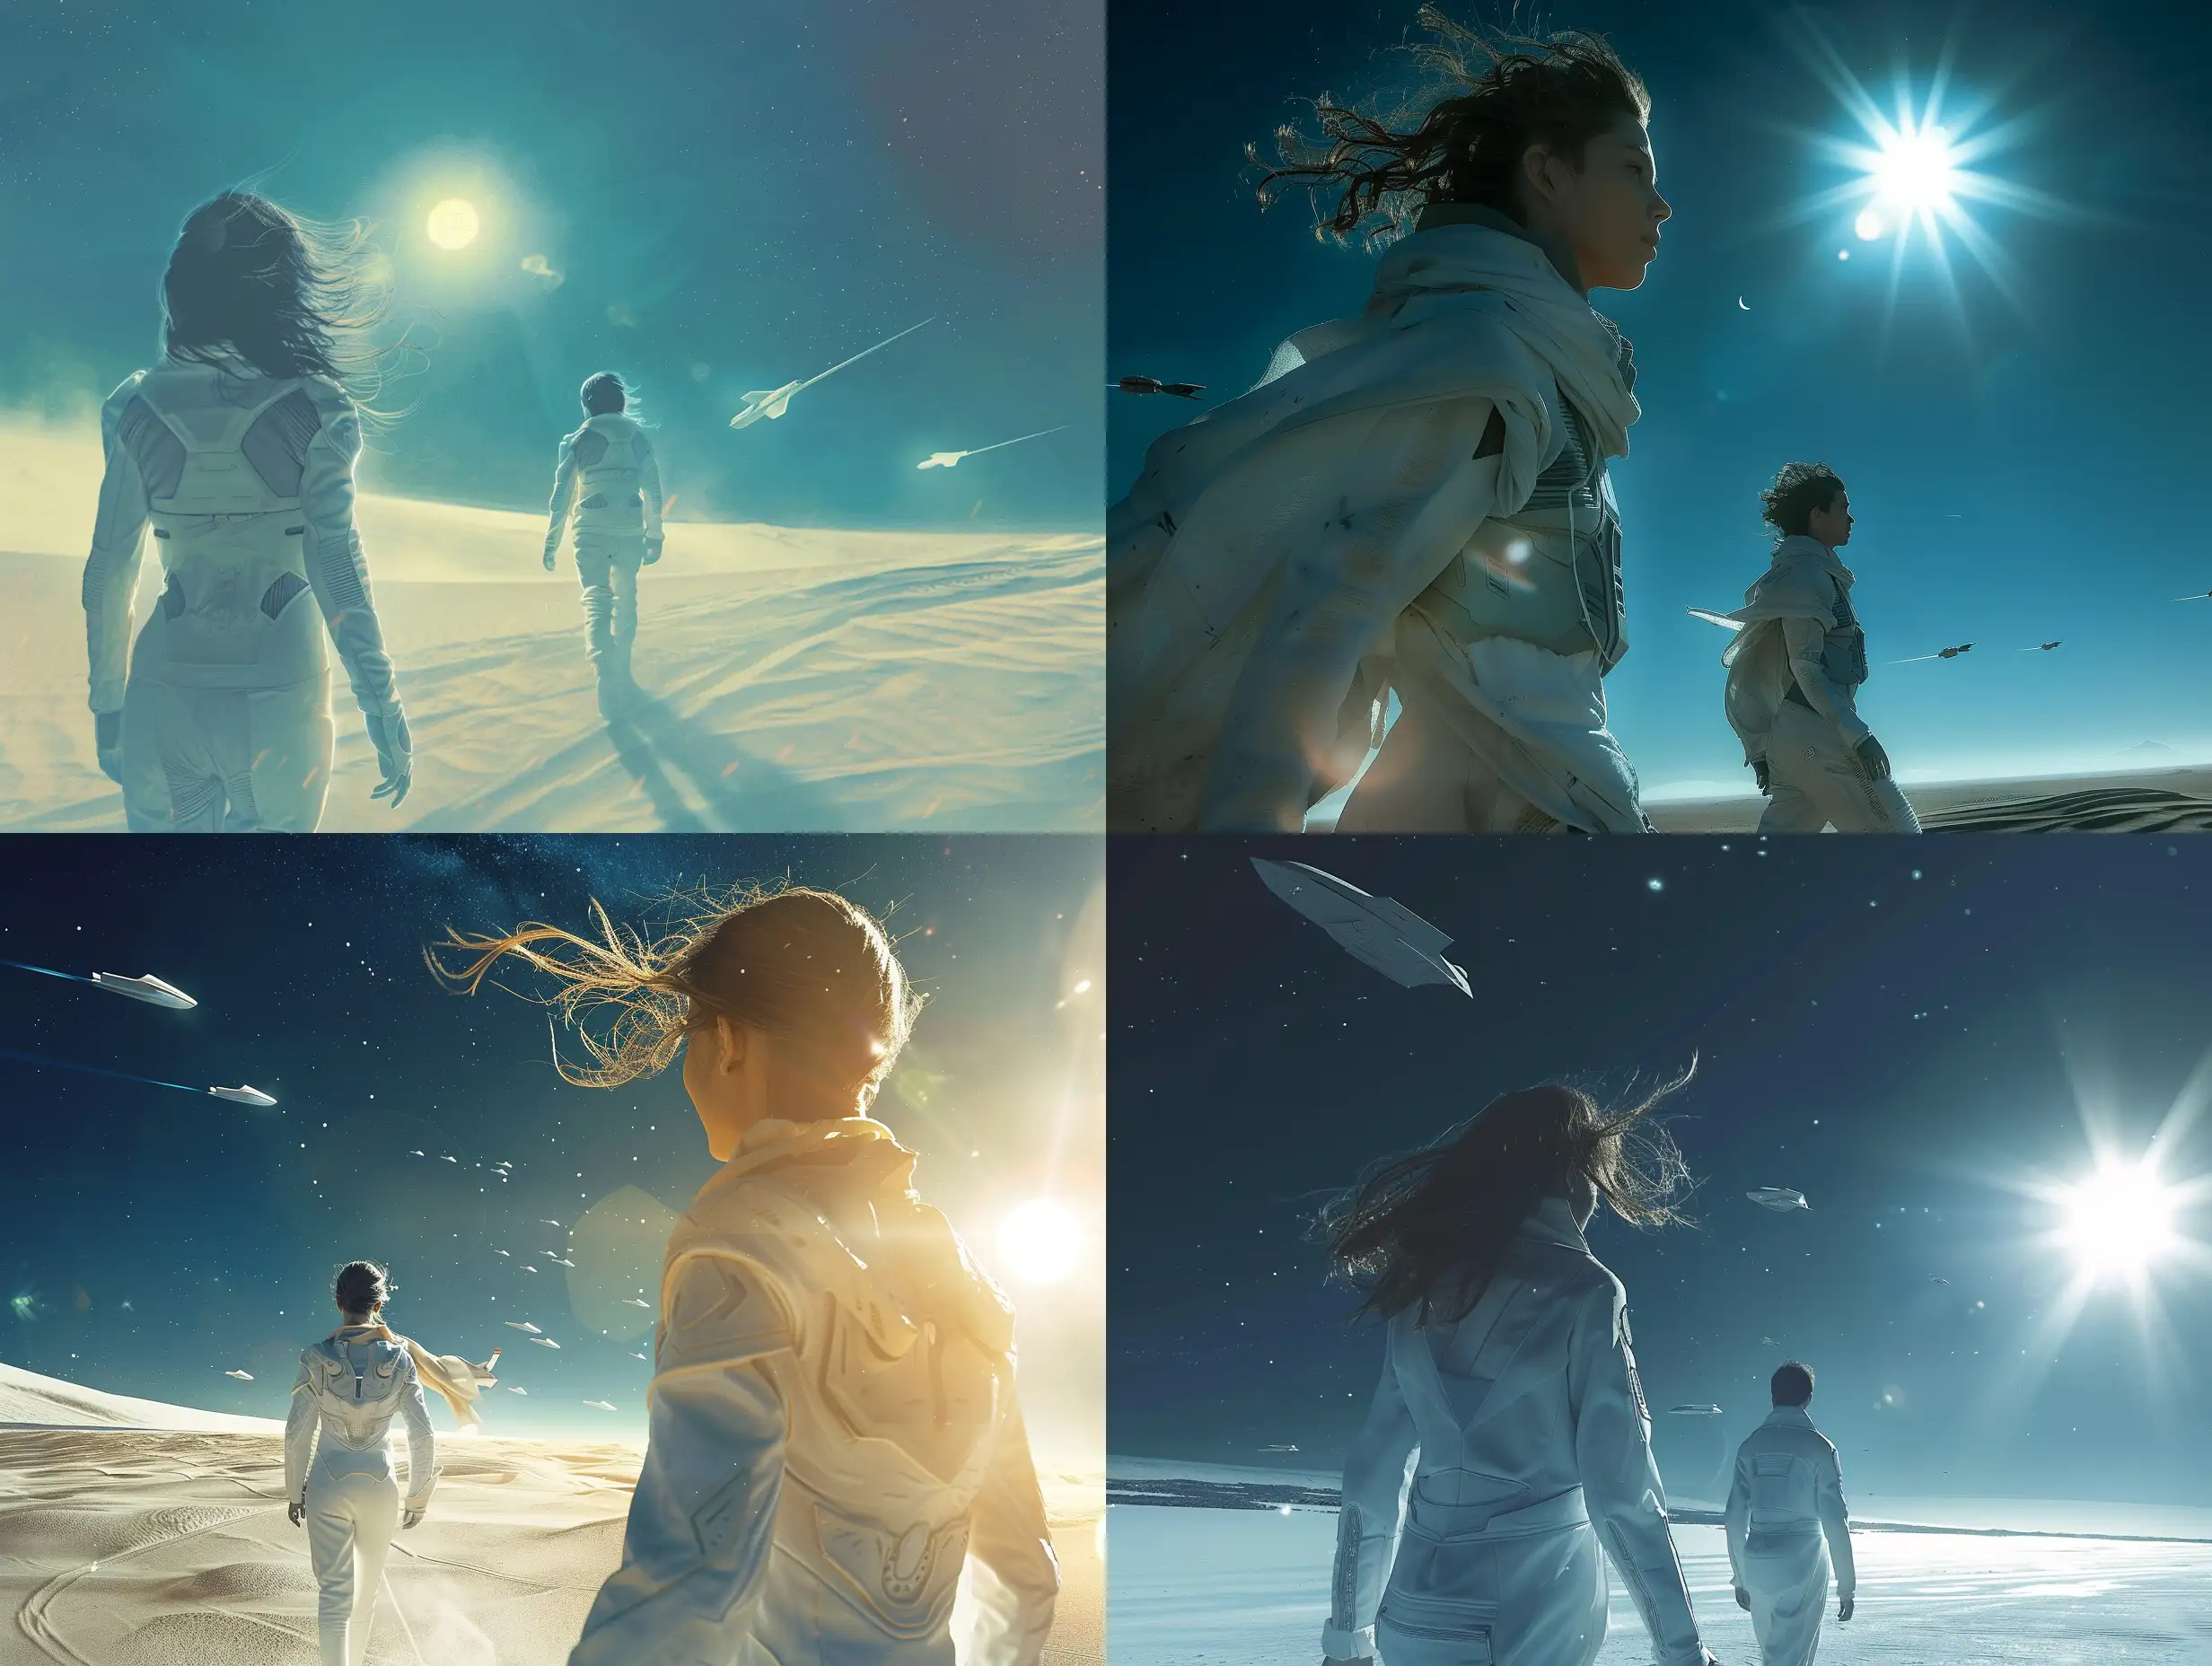 Exploring-a-Duneesque-Planet-Adventurous-Journey-of-a-Man-and-Girl-in-Space-Suits